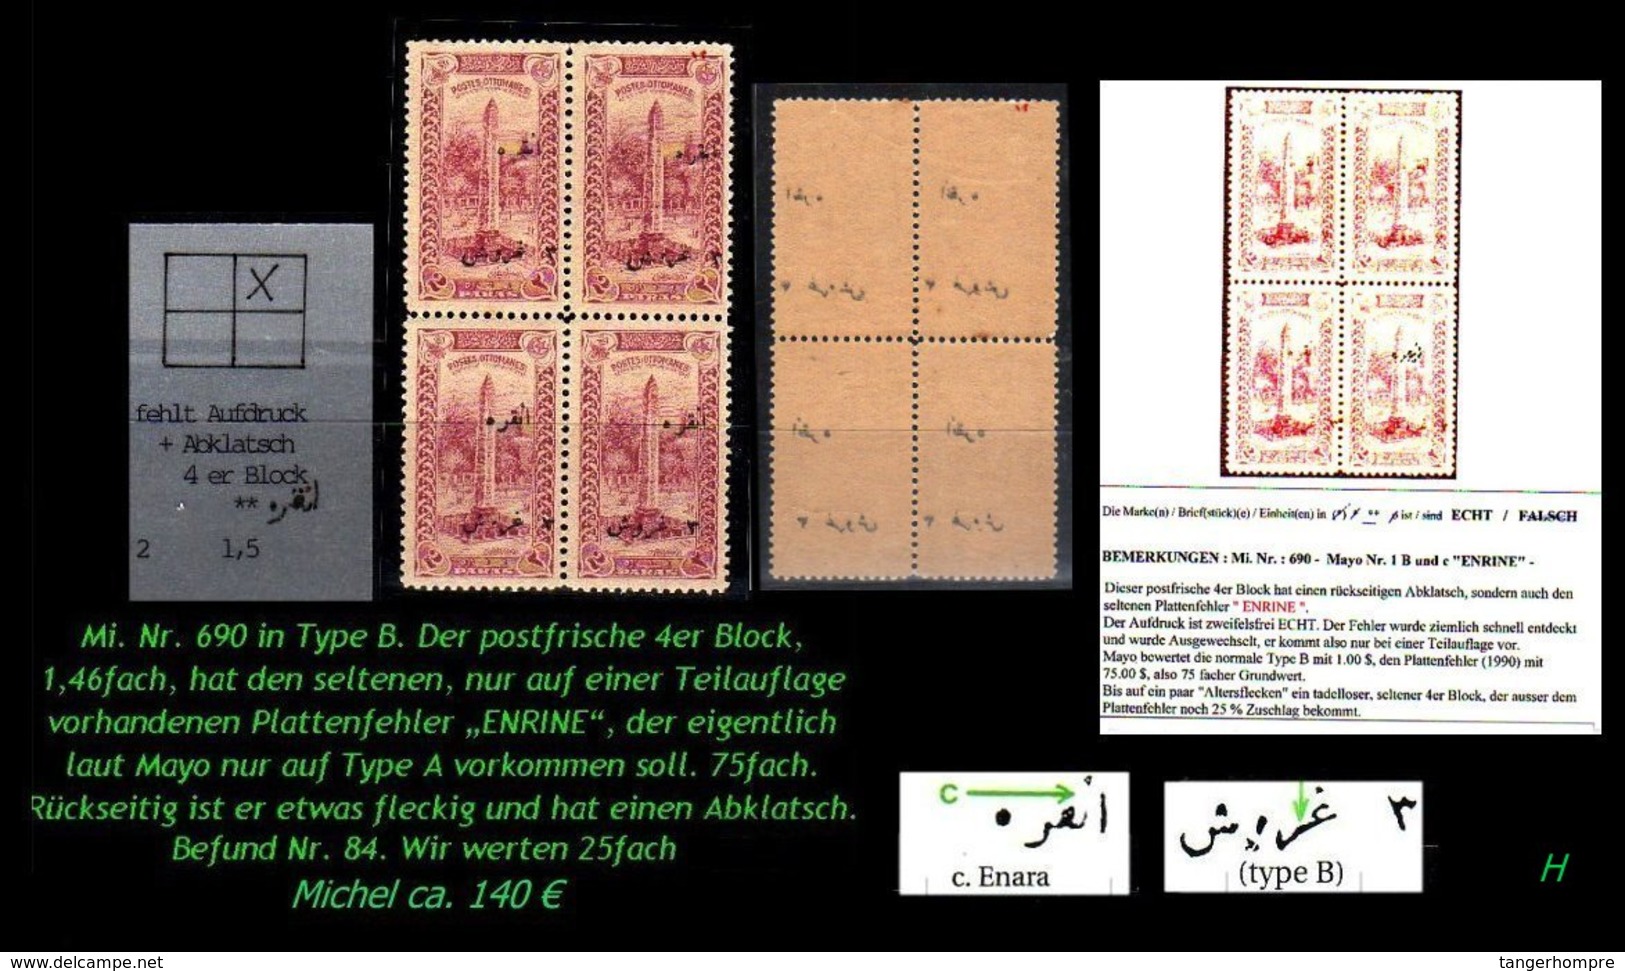 TURKEY ,EARLY OTTOMAN SPECIALIZED FOR SPECIALIST, SEE...Mi. Nr. 690 Type Bfc - Plattenfehler + 4er Block-RRR- - 1920-21 Anatolia